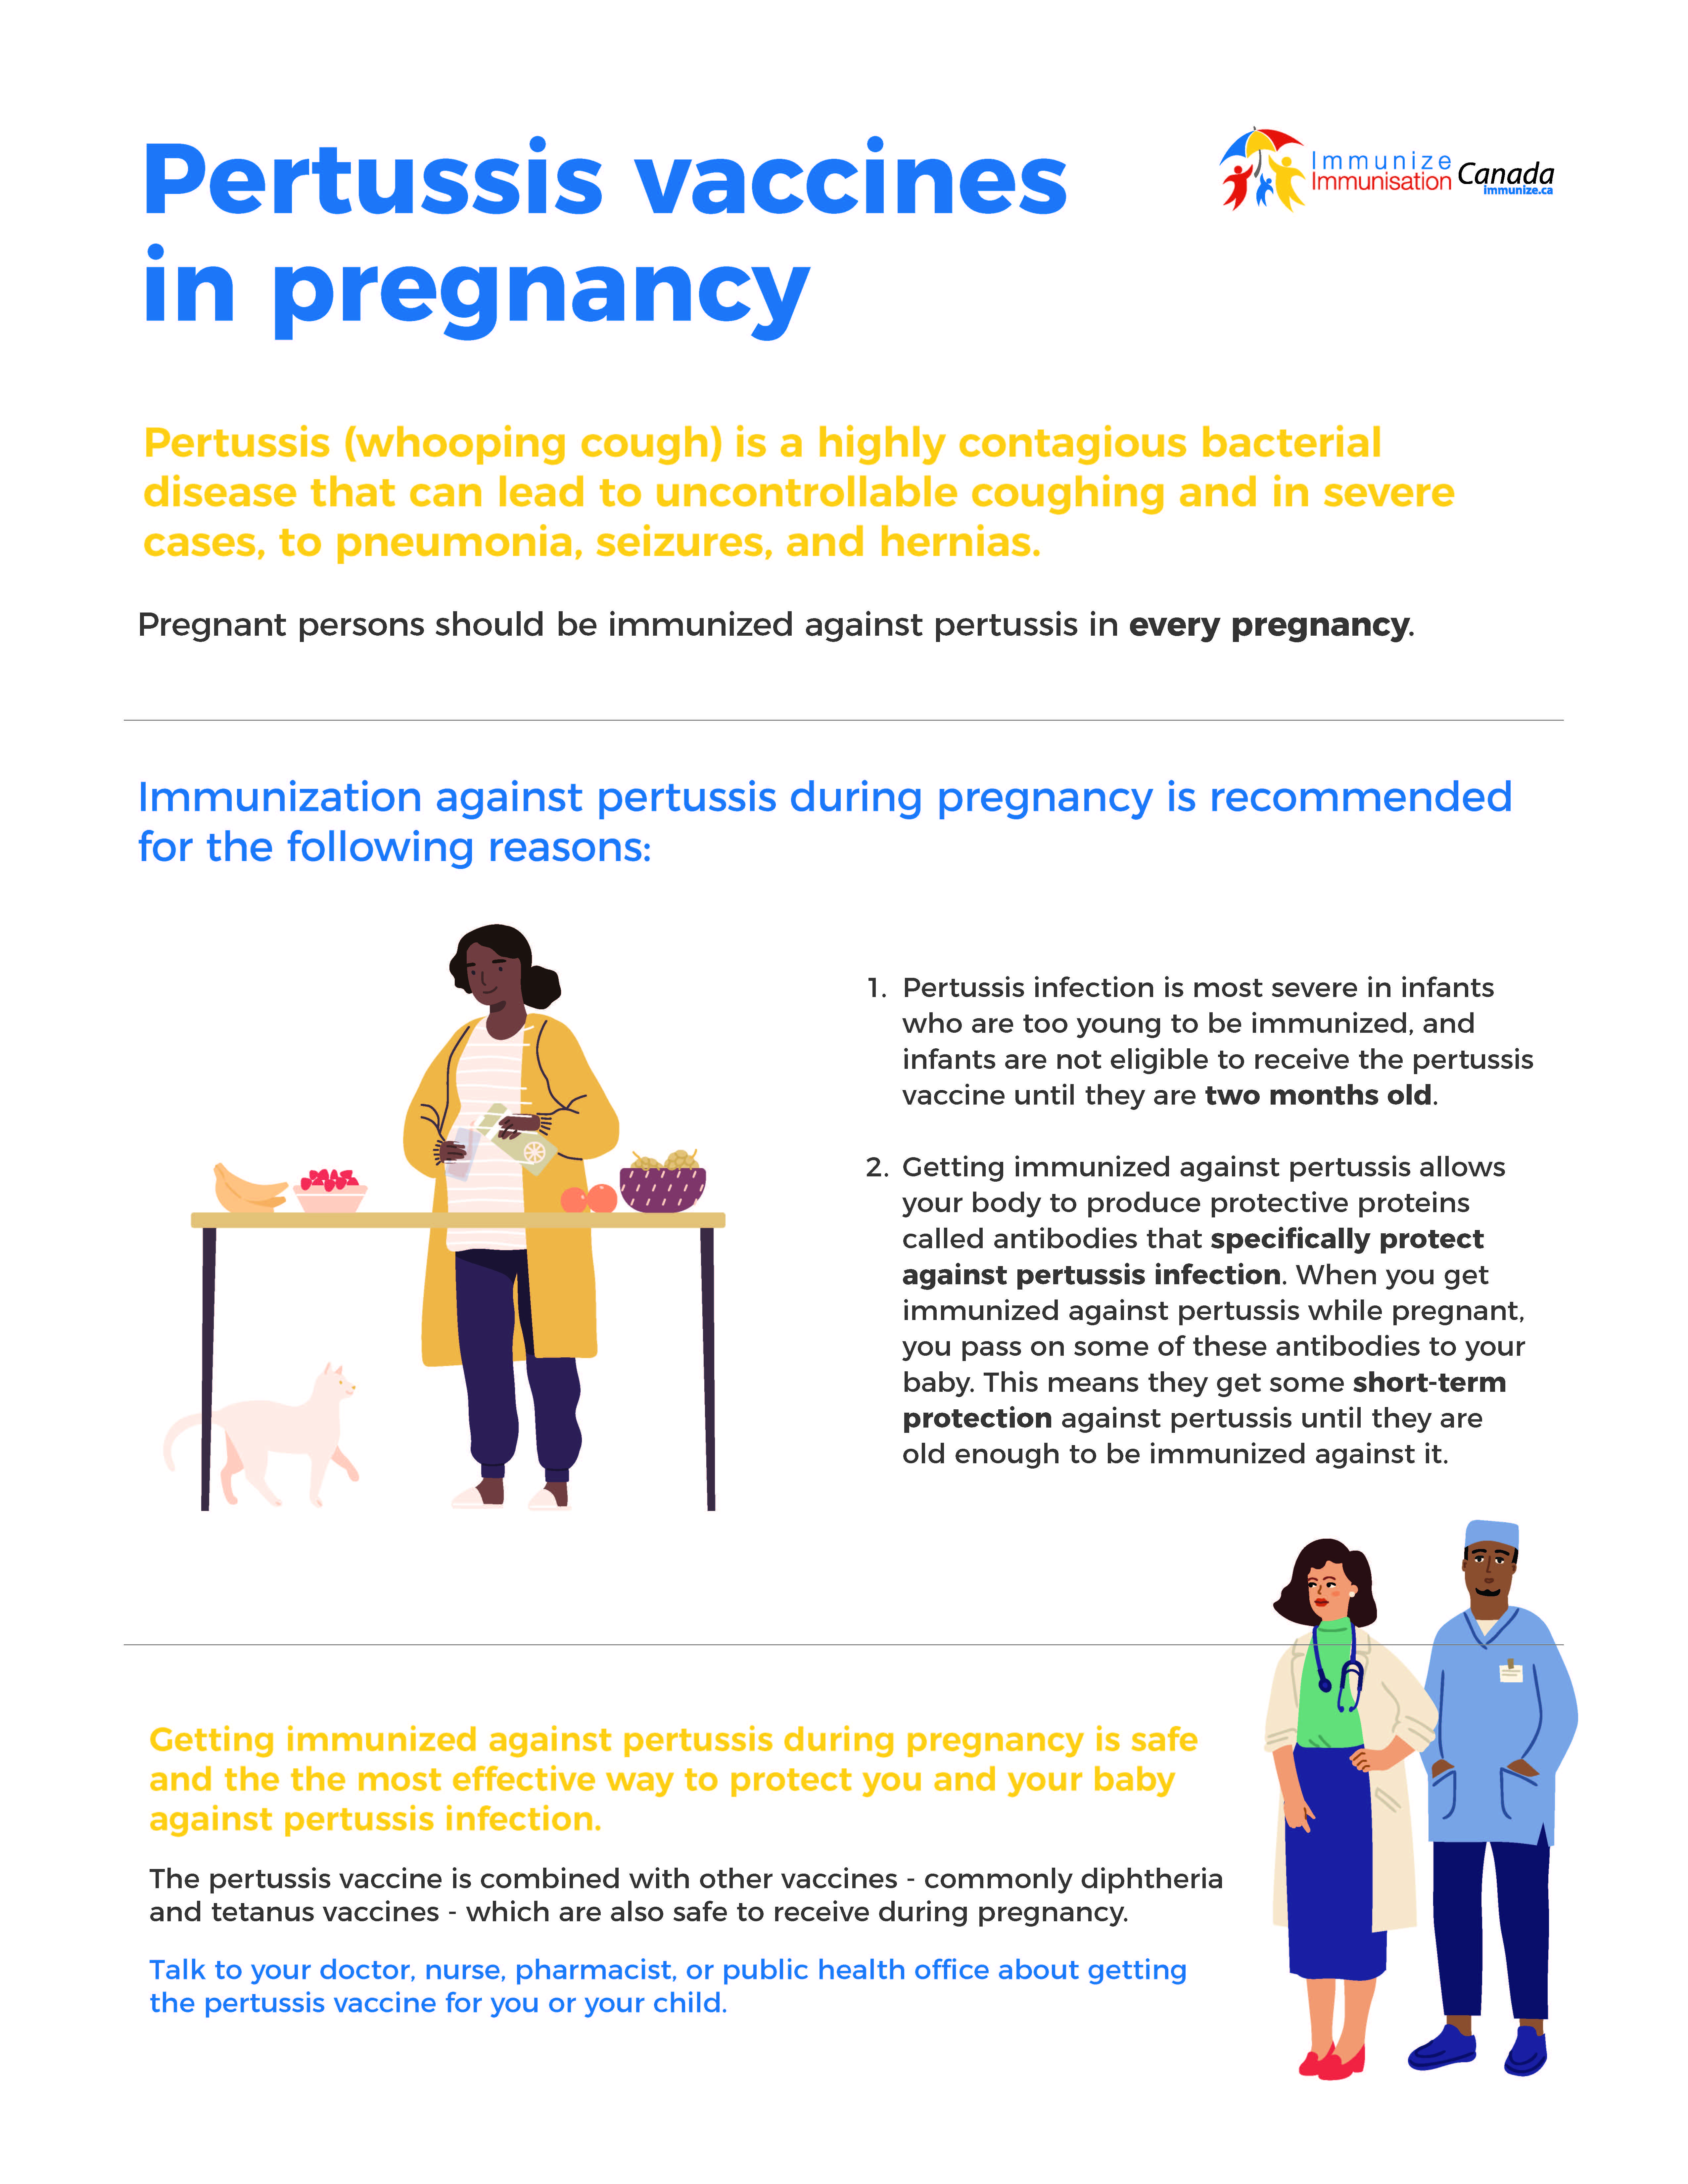 Pertussis vaccines in pregnancy - infographic